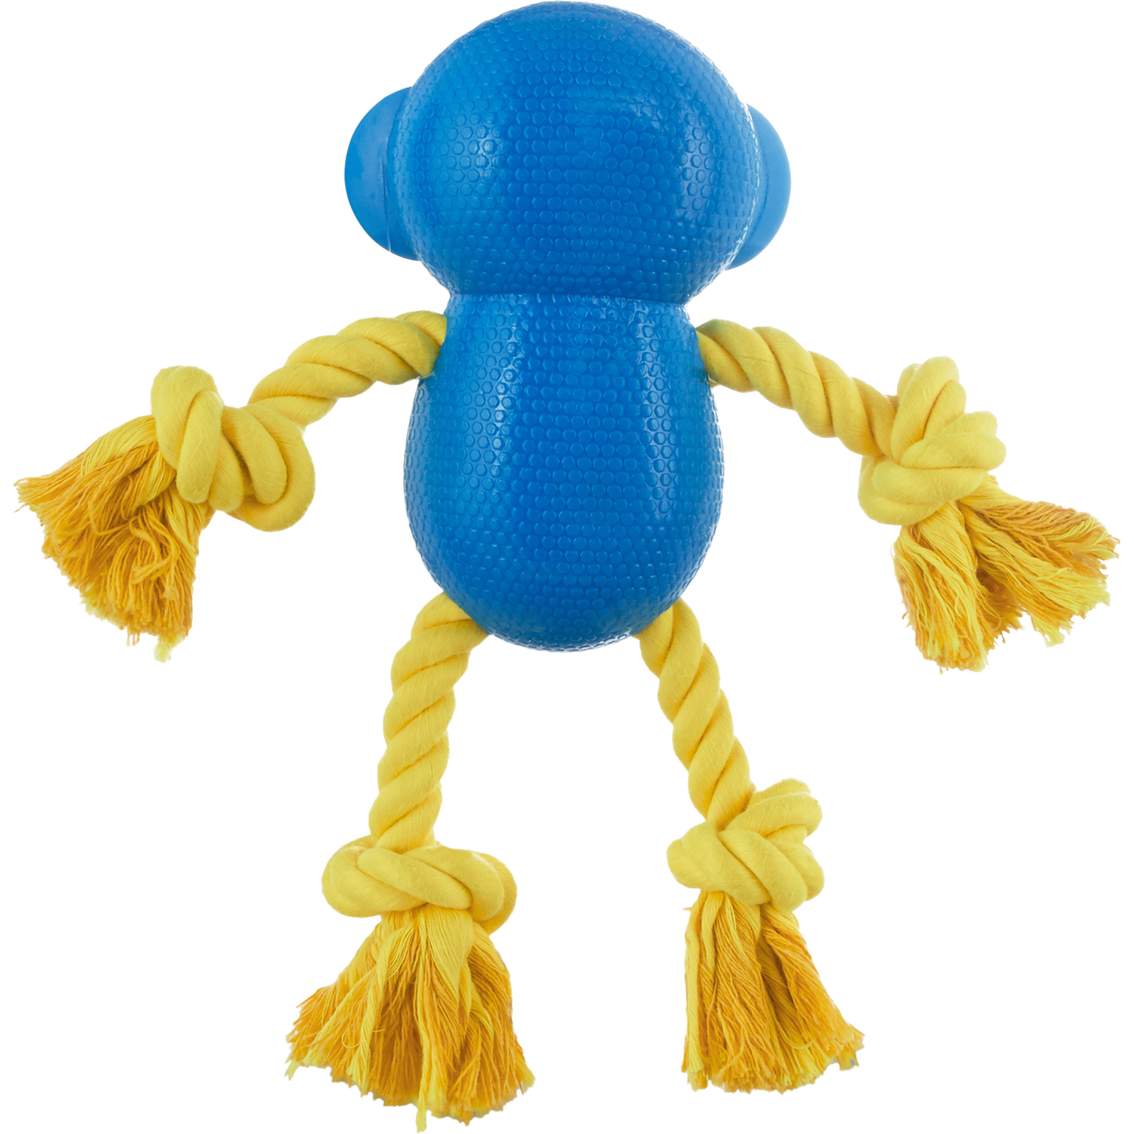 Leaps & Bounds Chomp and Chew Rope Limbs Monkey Dog Toy, Medium - Image 2 of 2